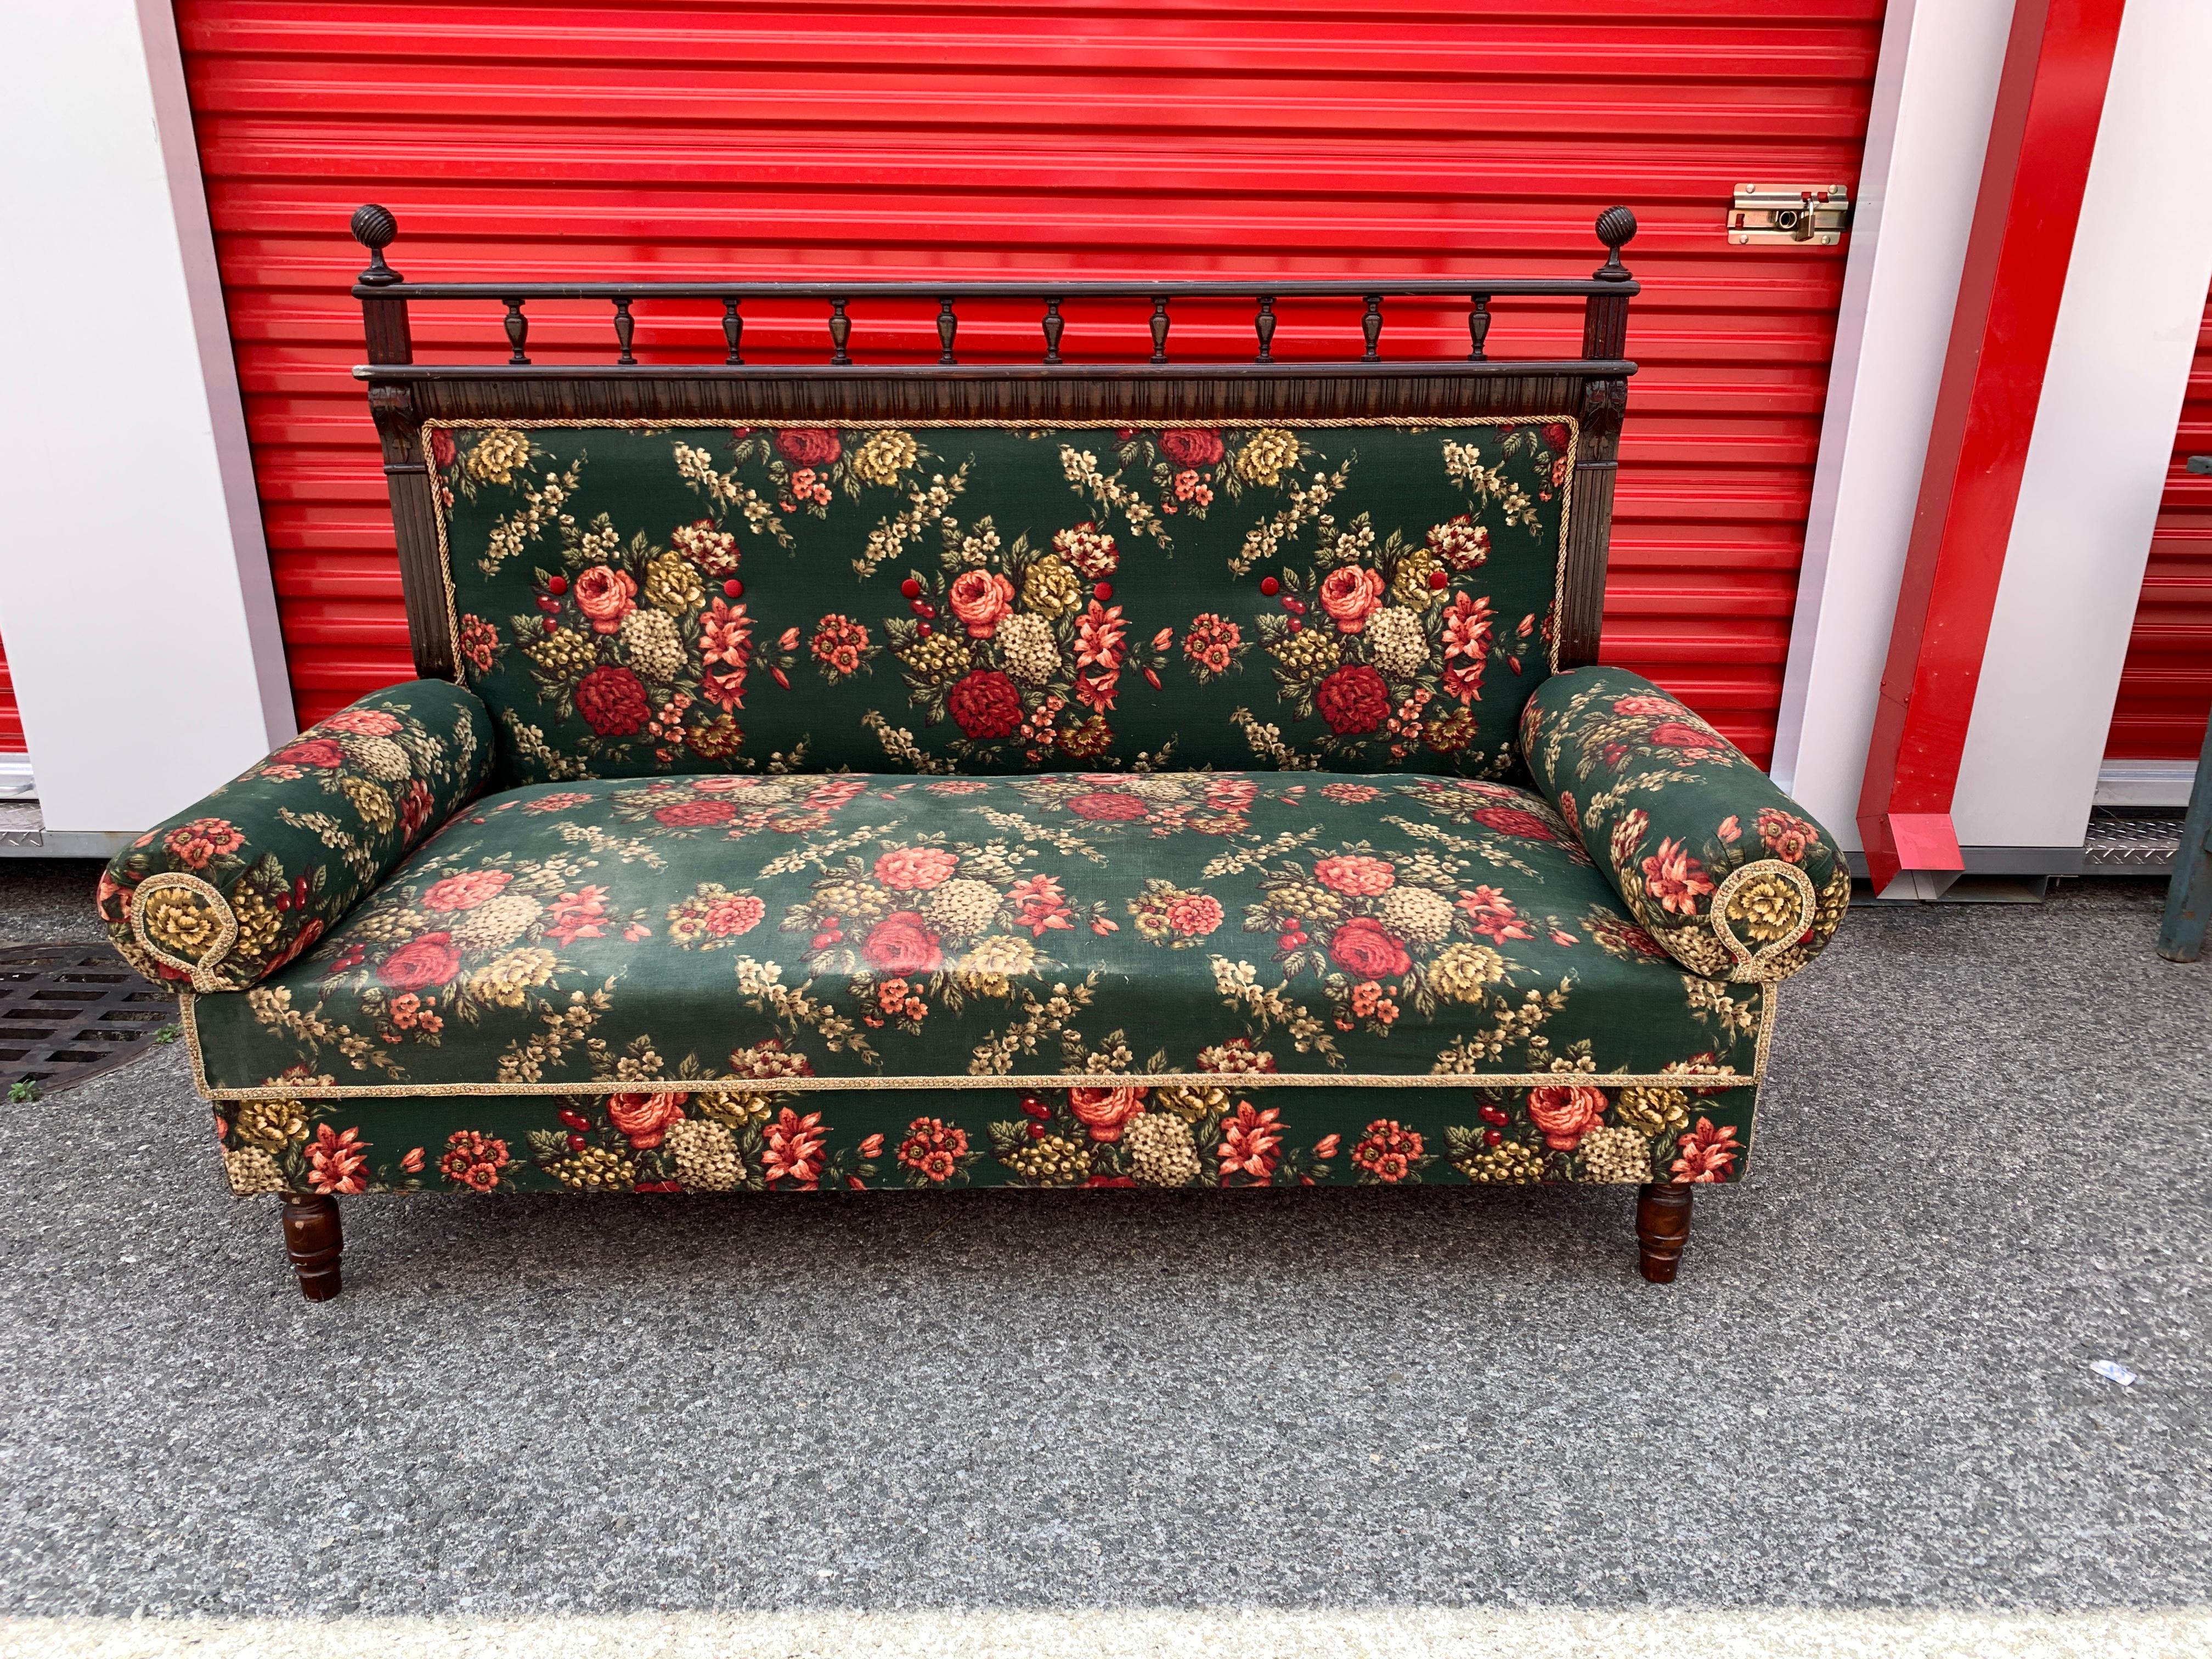 This antique French floral settee upholstered with a deep rich green fabric embellished with beautiful red and coral flowers brings a true sense of historic beauty. 

Arms and backing are both removable which makes storing and rearranging